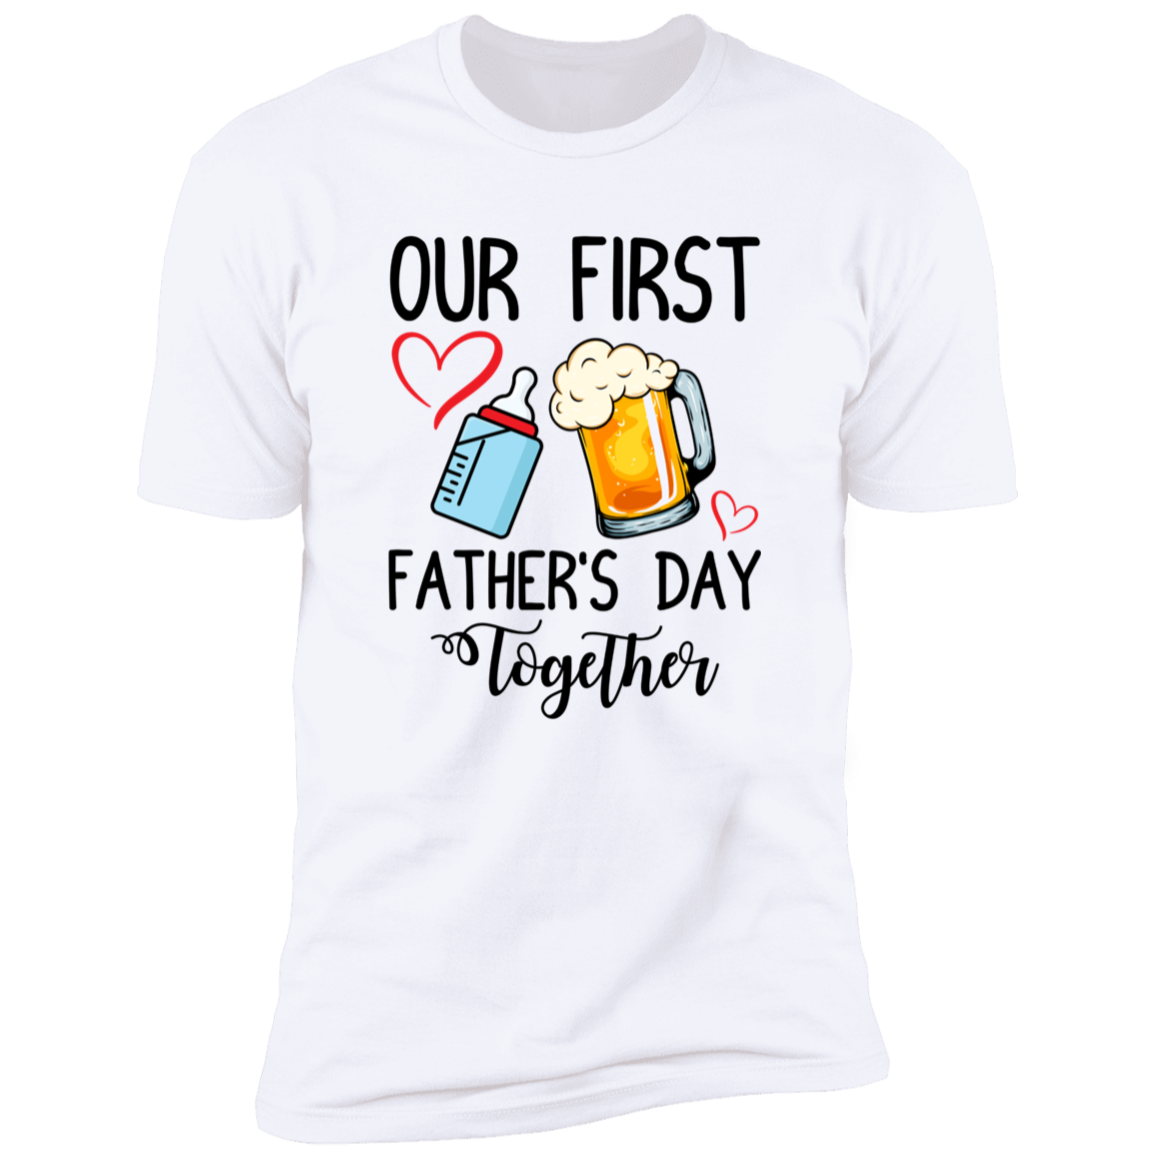 OUR 1ST FATHER'S DAY PREMIUM SHORT SLEEVE T-SHIRT